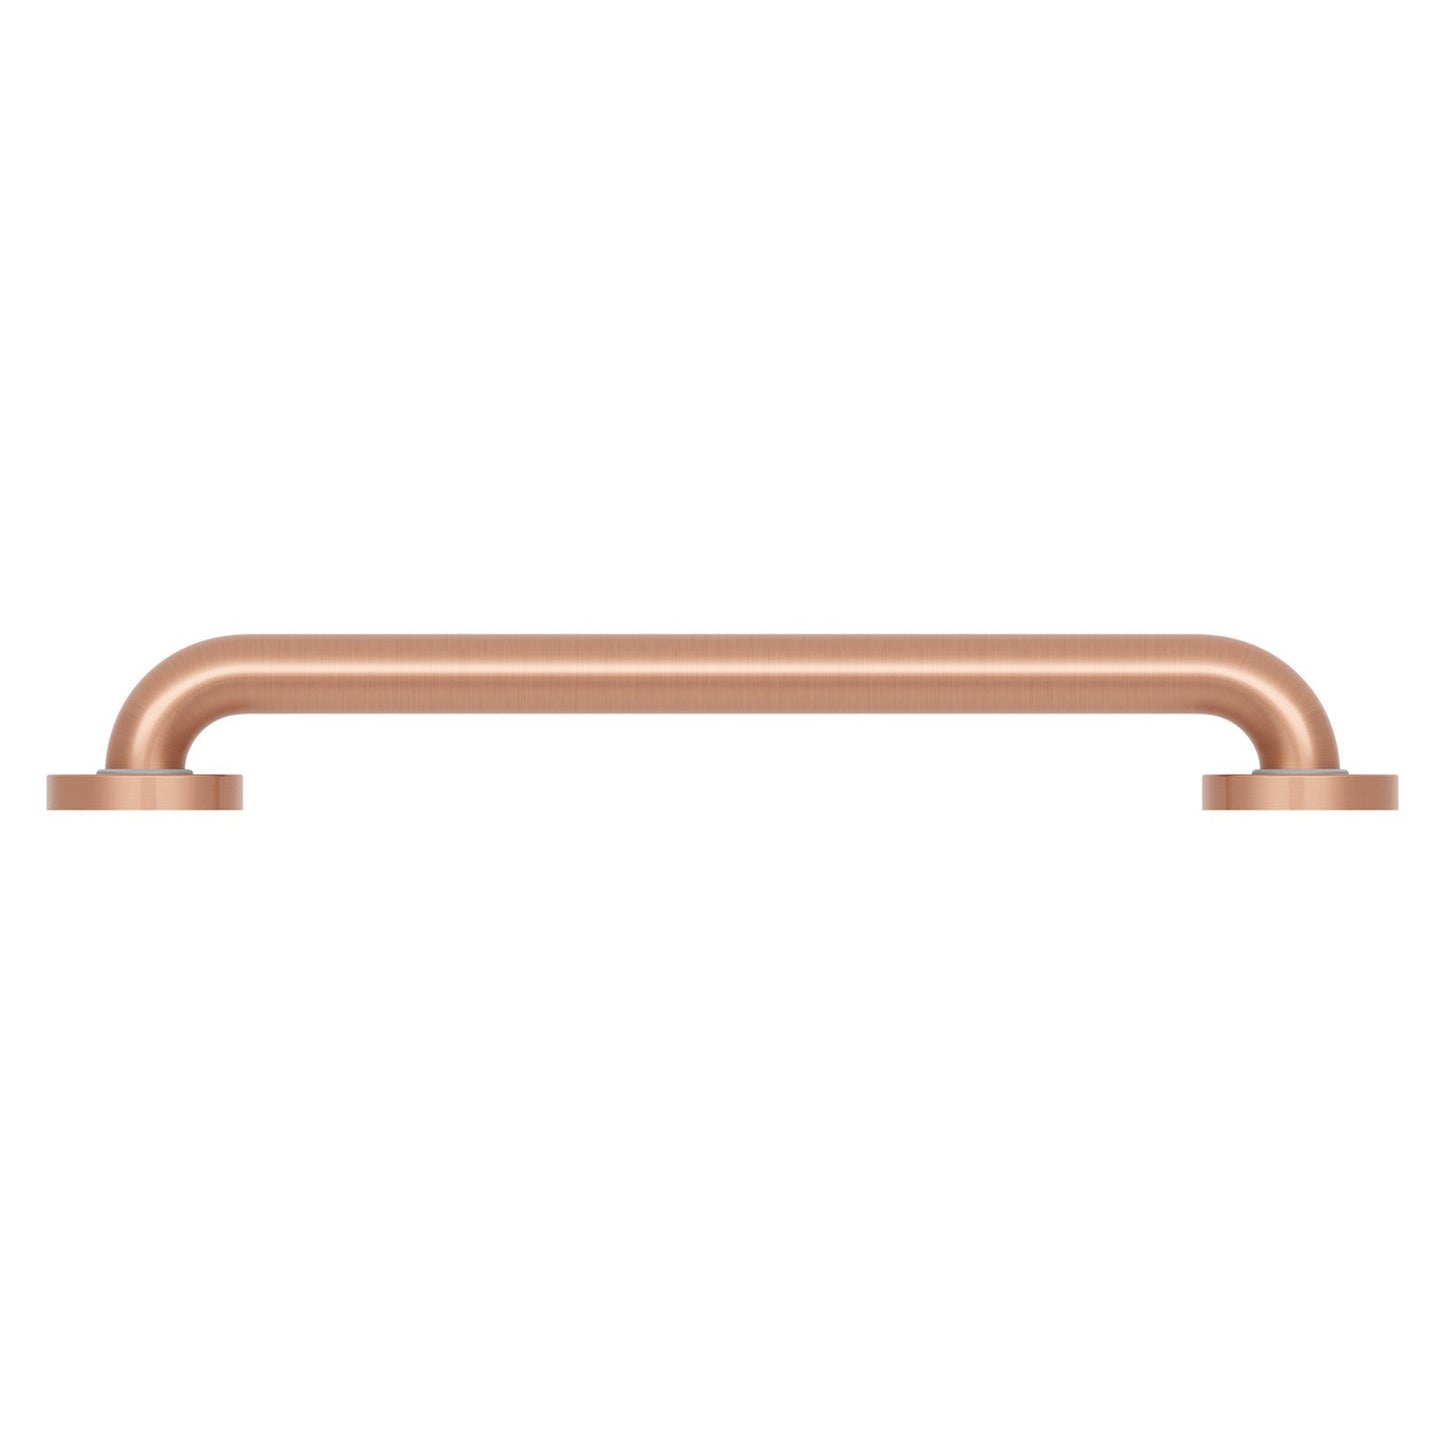 Evekare 18" x 1.25" Stainless Steel Concealed Mount Grab Bar in Brushed Rose Gold